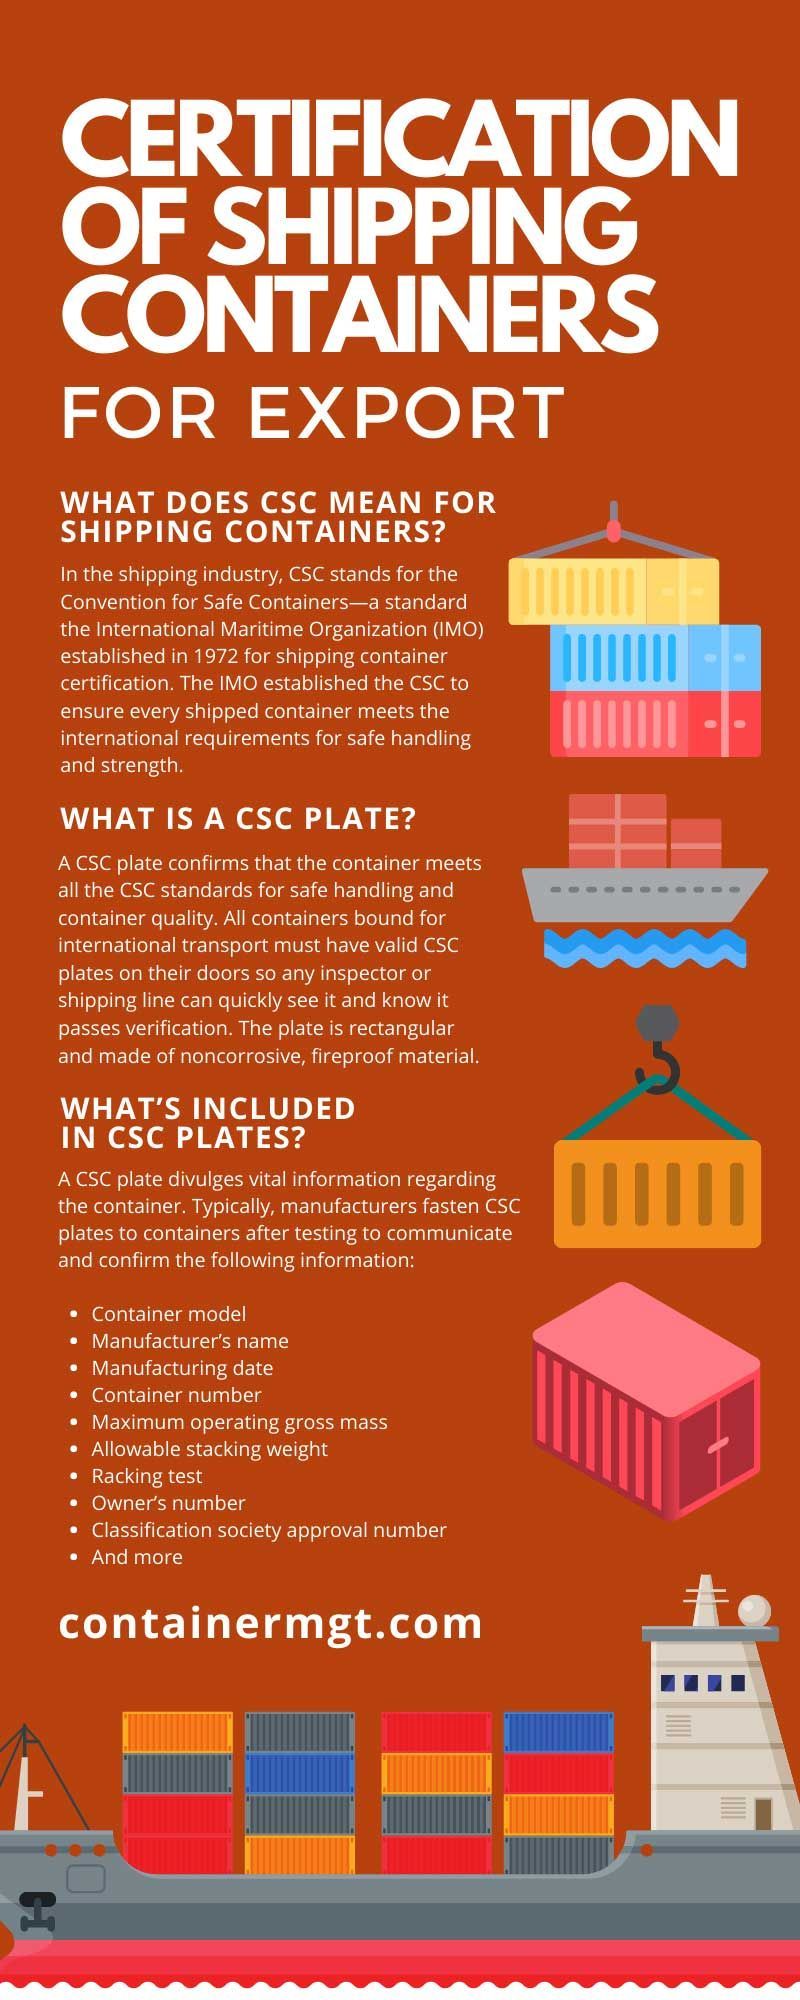 Certification of Shipping Containers for Export